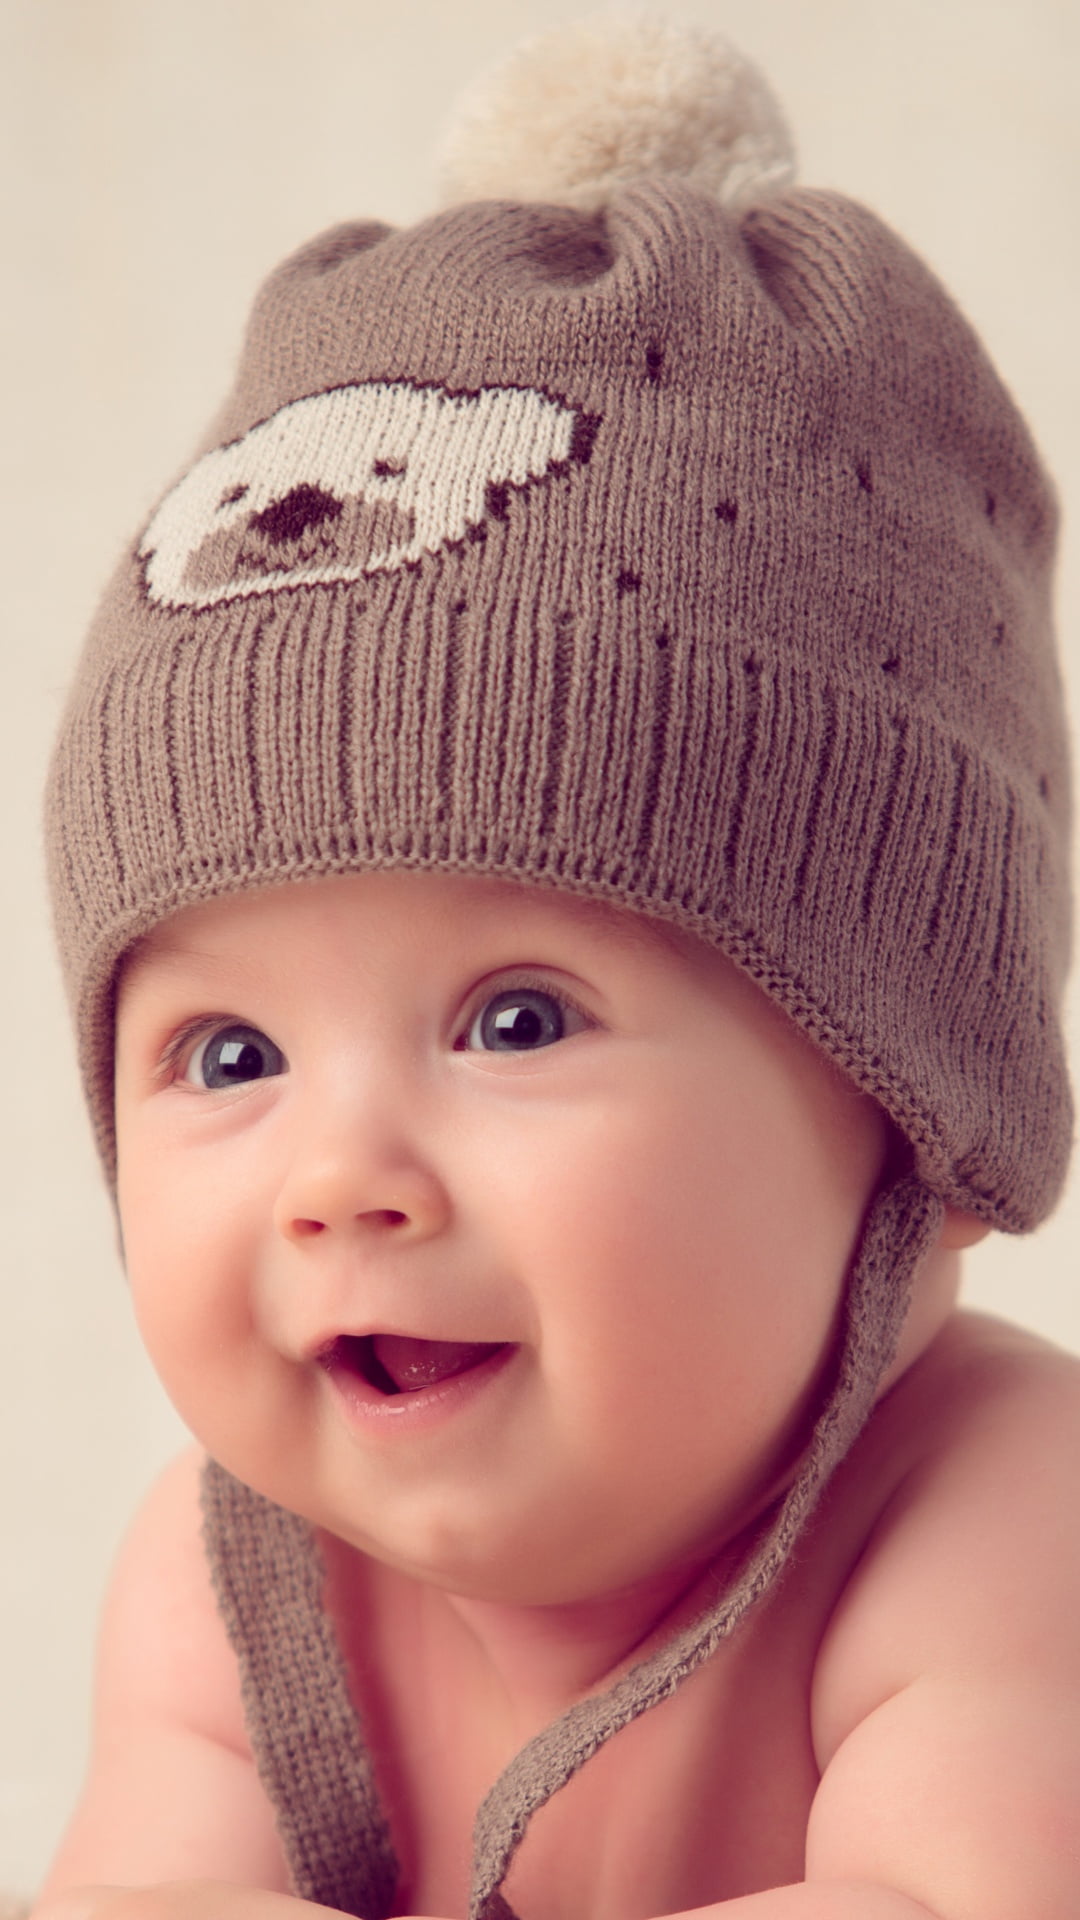 Newborn Kid Sweet Face, gray and beige knitted cap, Baby, cute